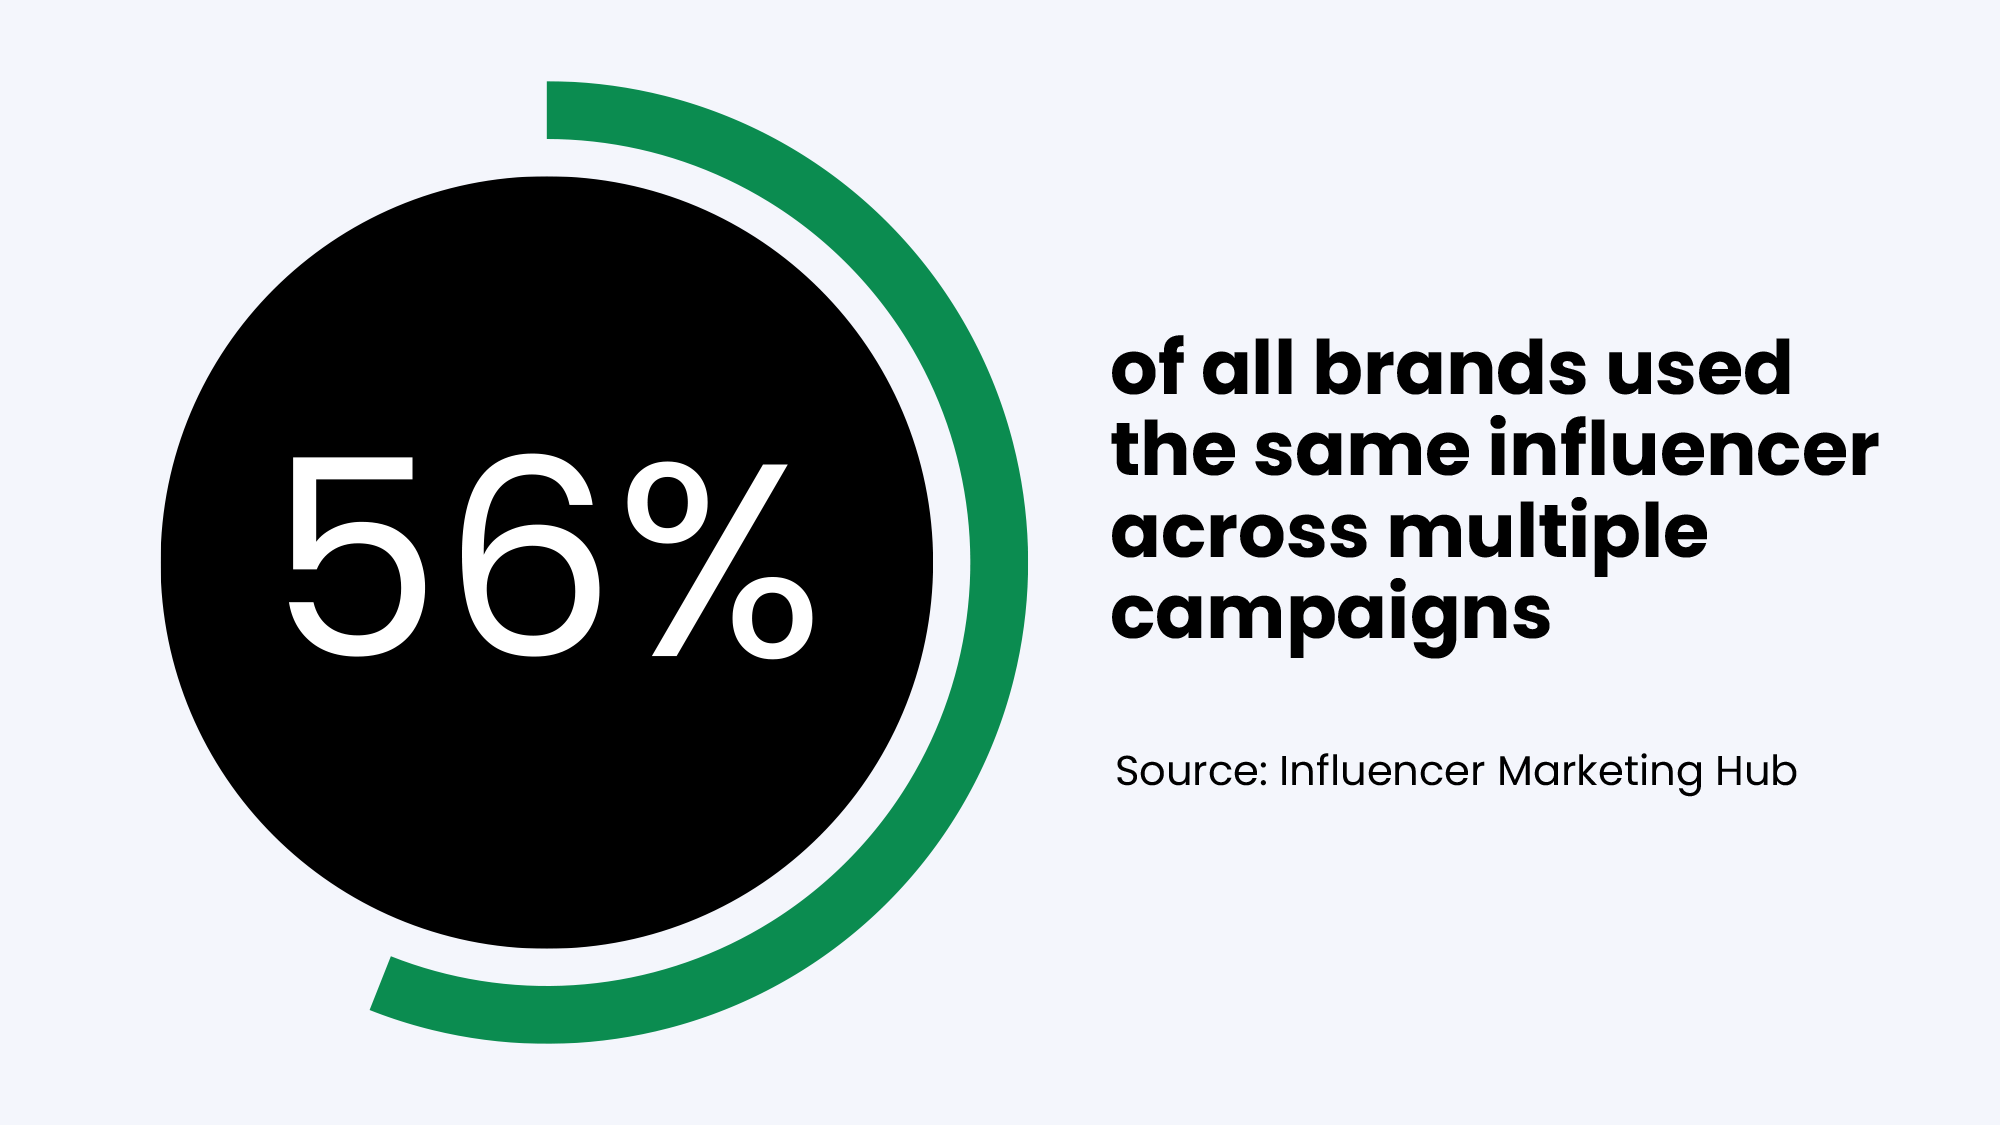 56% of all brands used the same influencer across multiple campaigns